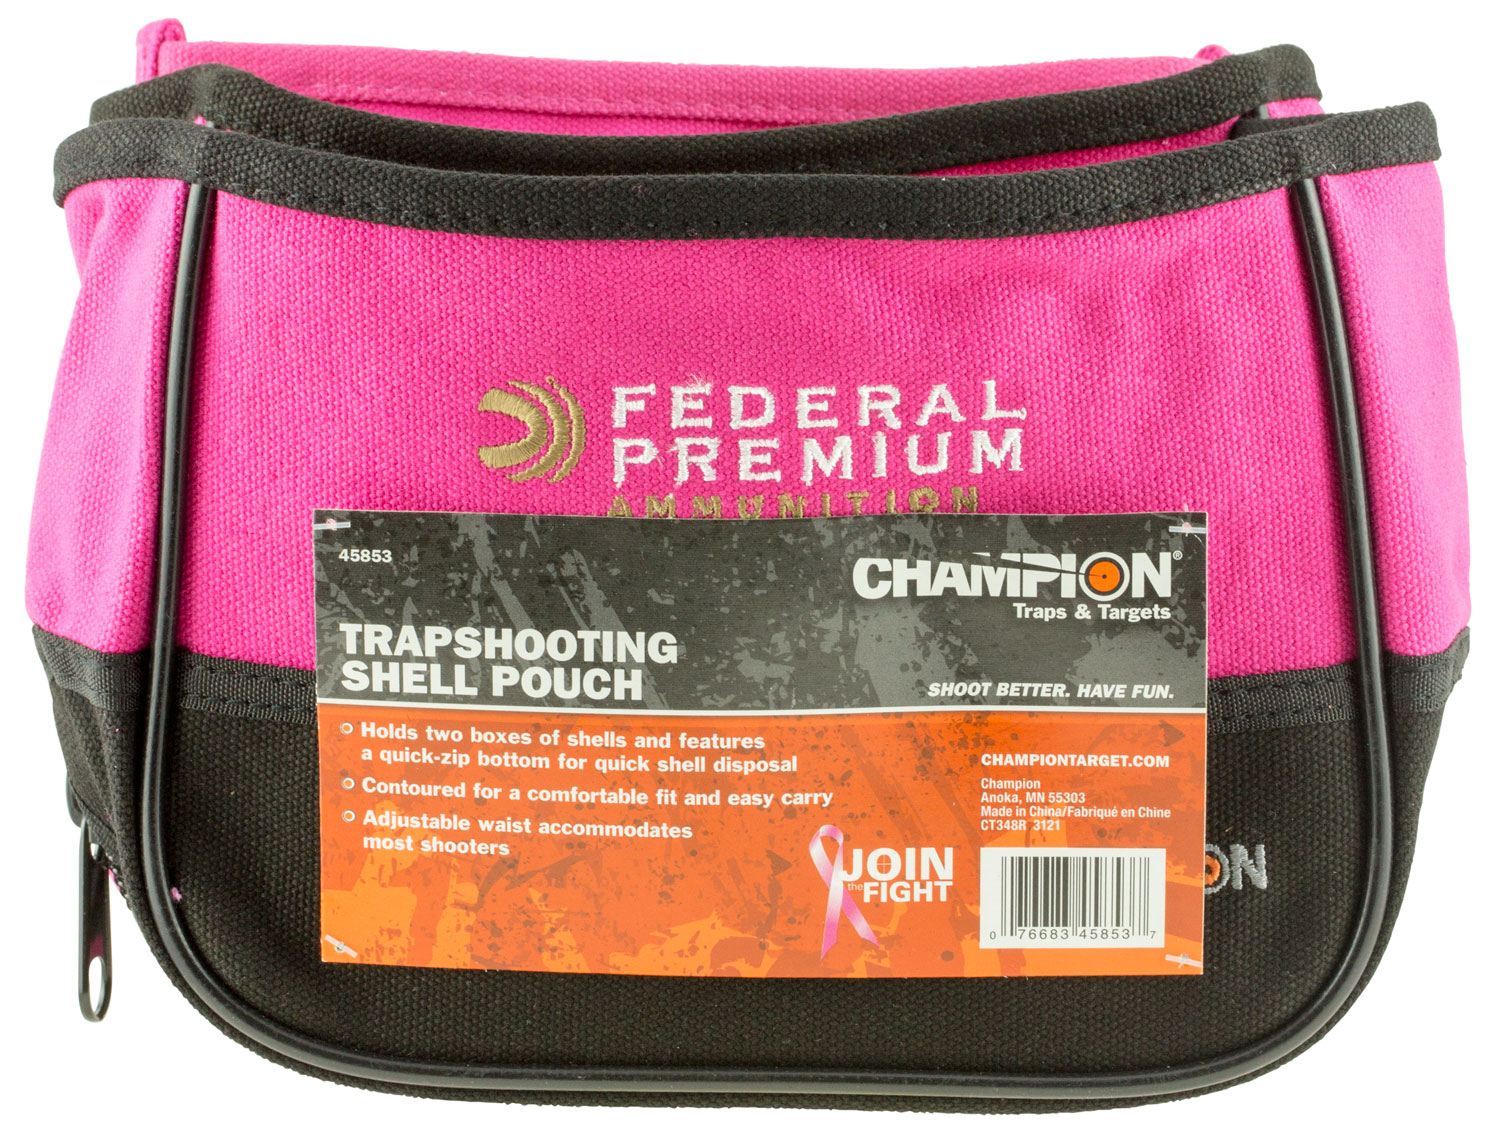 Champion Targets 45853 Trapshooting Double Shell Pouch Pink Nylon Capacity 2 boxes Waist Mount